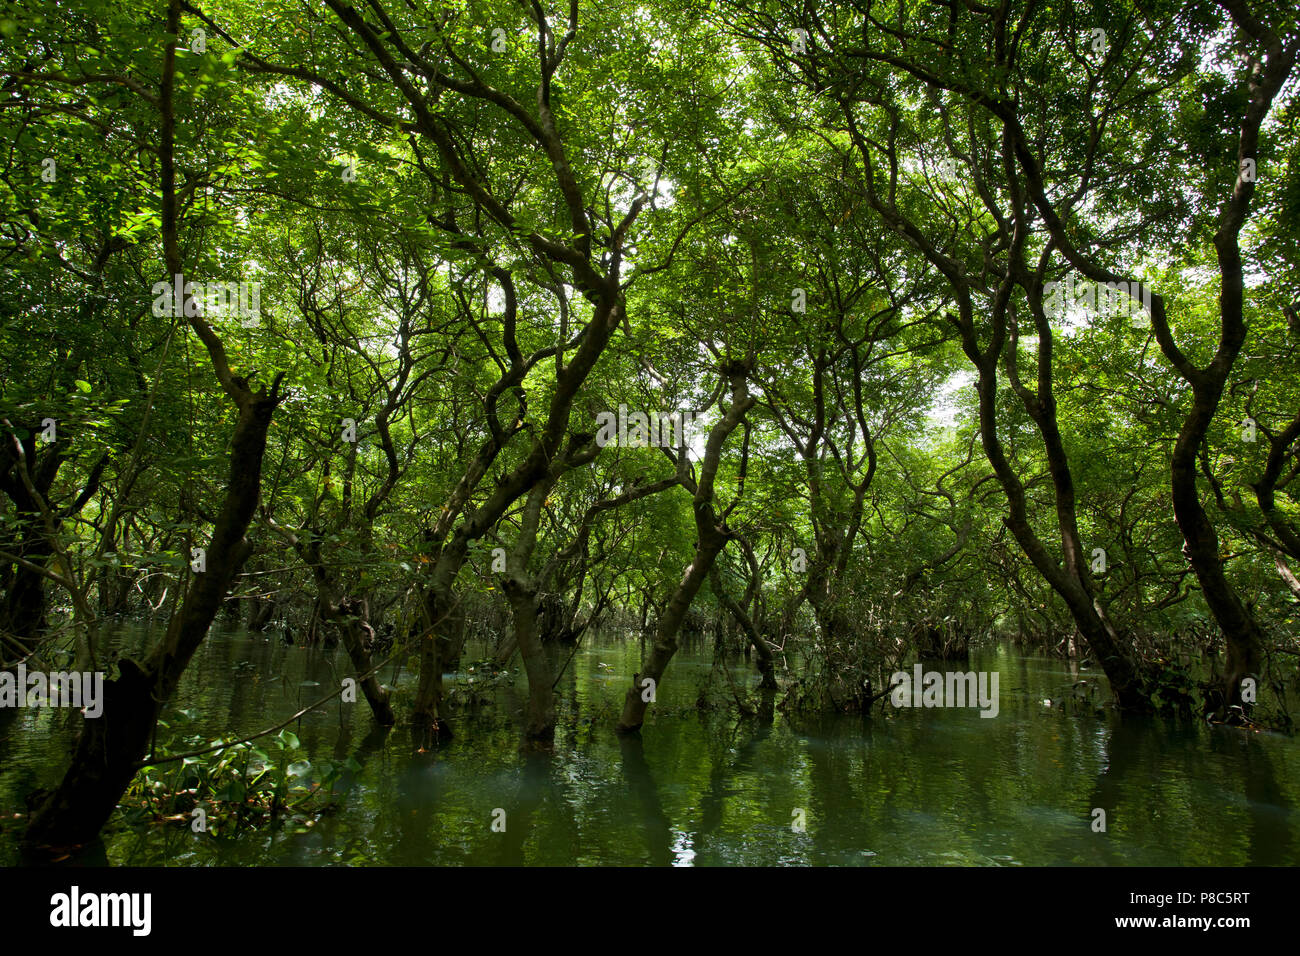 Ratargul is a fresh water swamp forest situated in Sylhet by the river of Goain. This evergreen forest is getting submerged under 20 to 30 feet water  Stock Photo